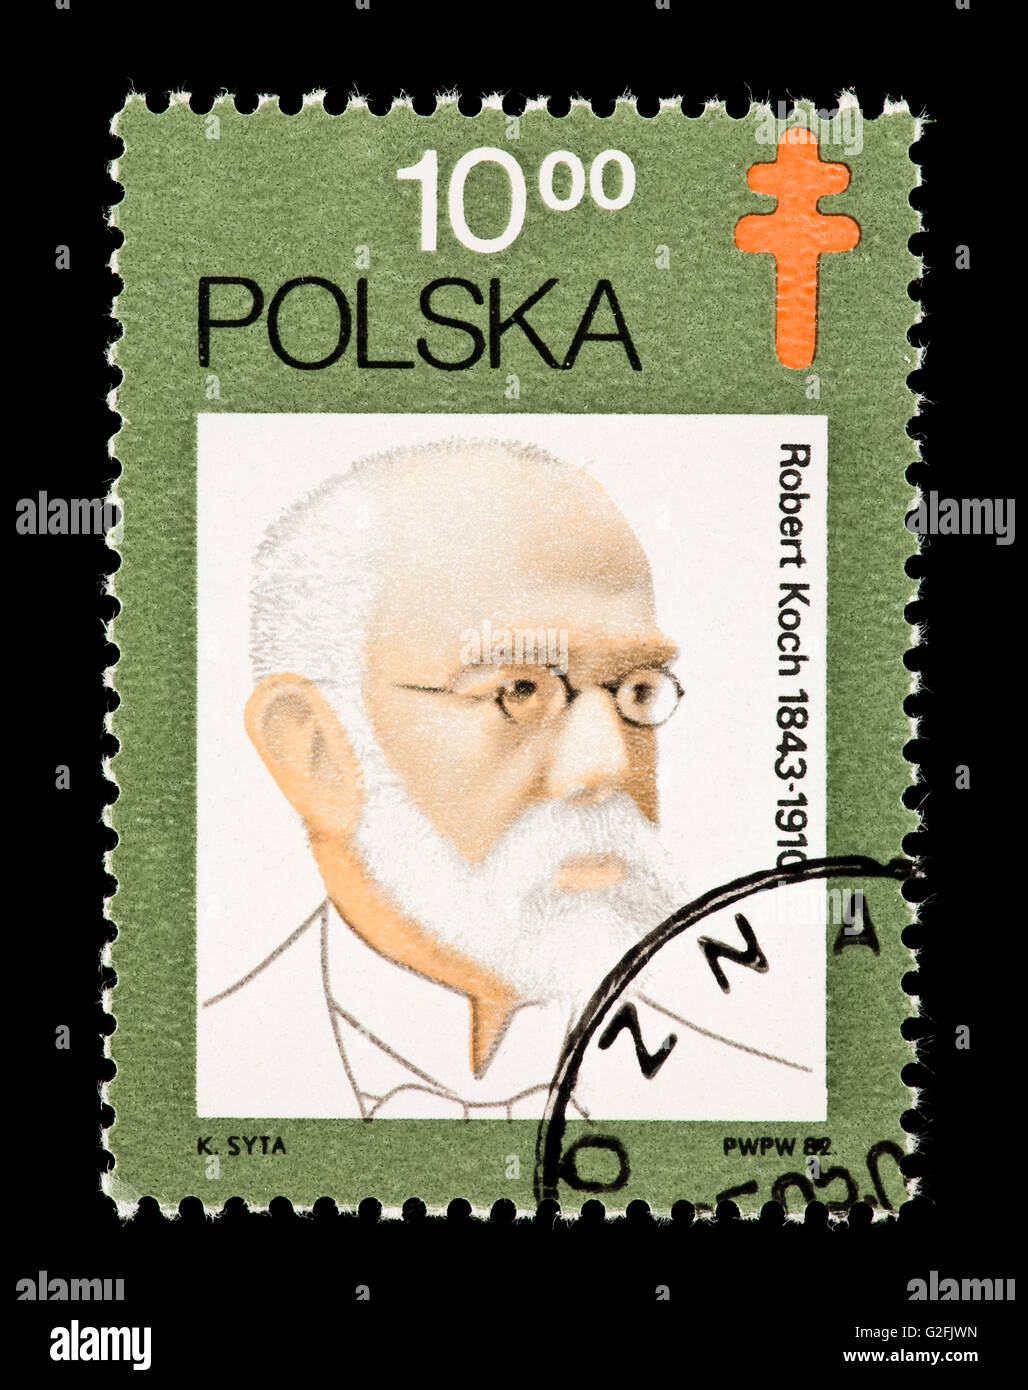 Postage stamp from Poland depicting Robert Koch, bacteriologist and discoverer of the bacterium Mycobacterium tuberculosis Stock Photo